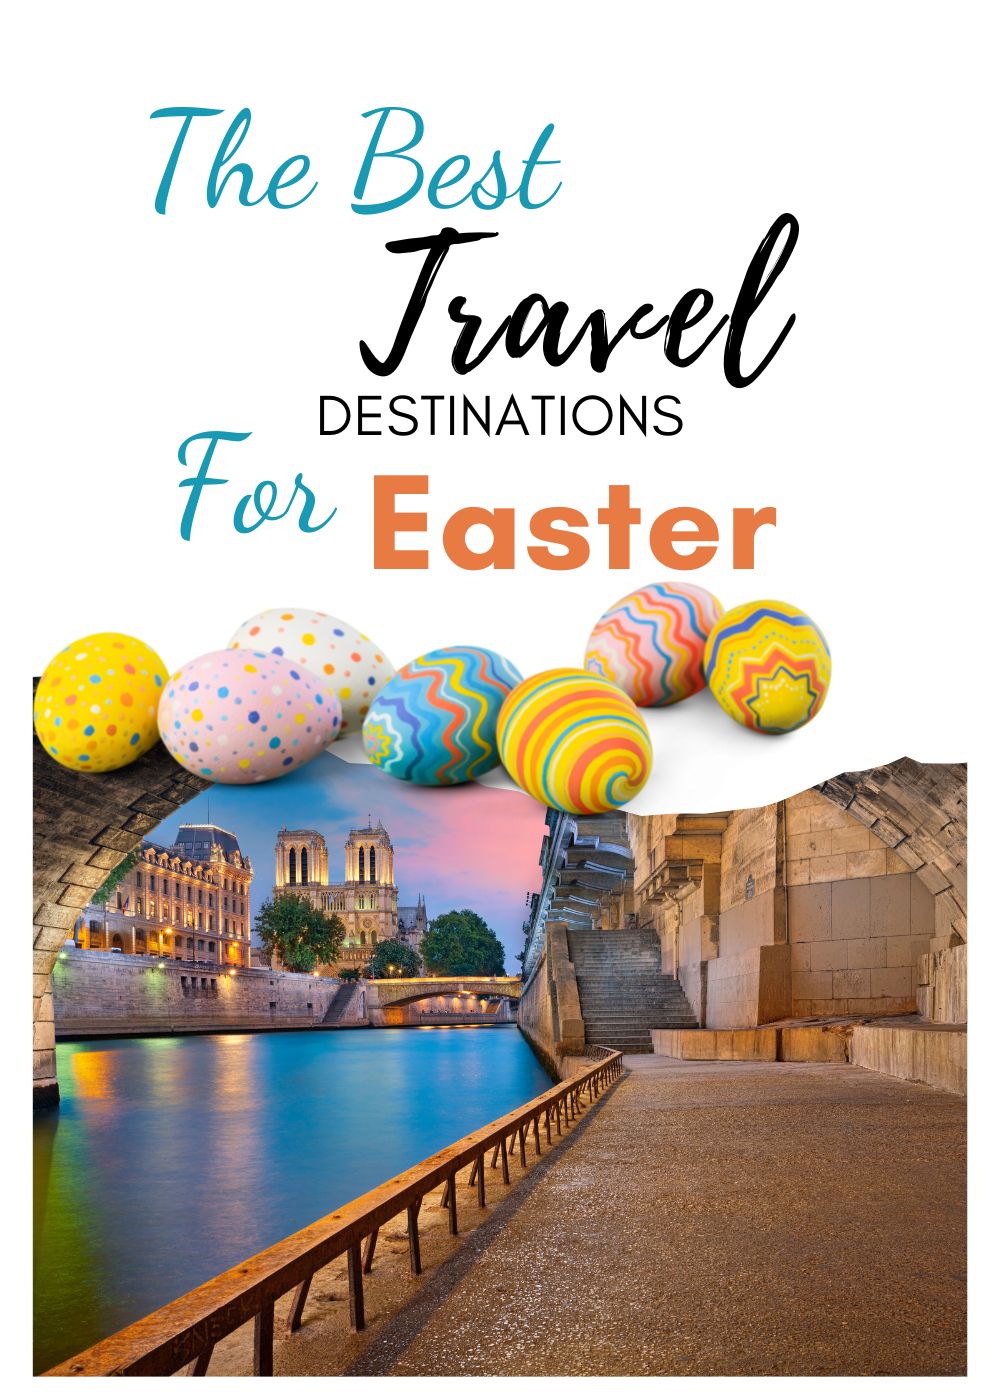 Top travel destinations for Easter time Passion Play Easter Egg hunts Romantic